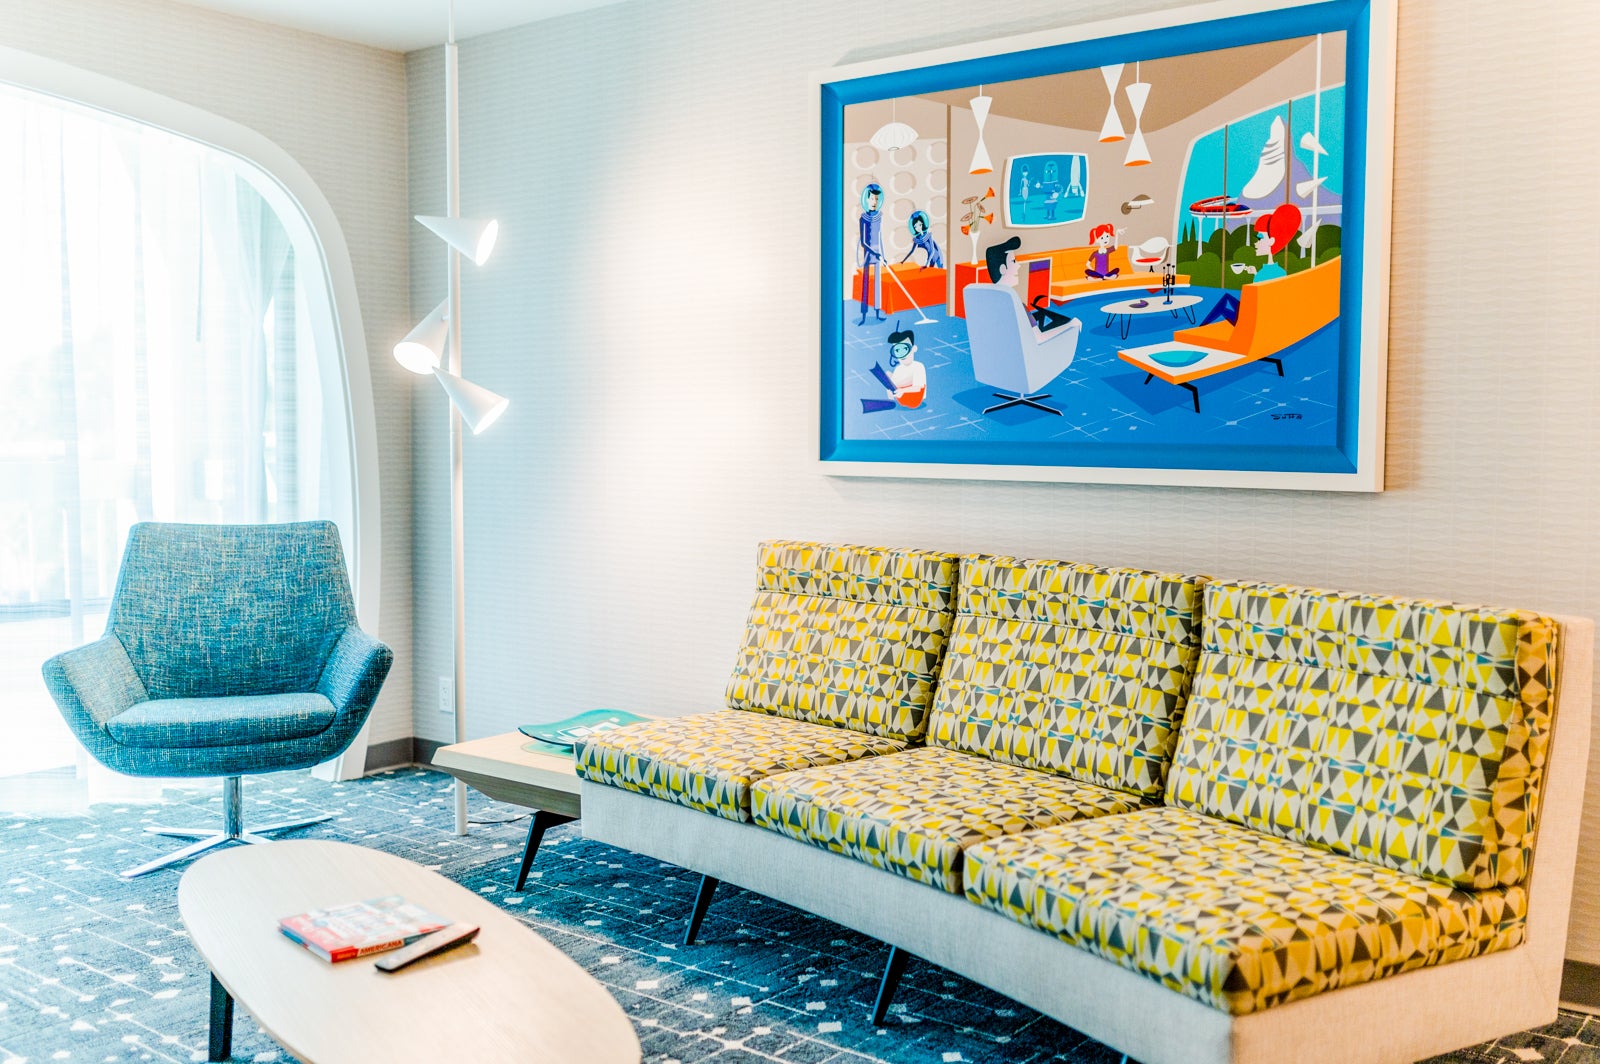 Howard Johnson Anaheim Opens Monsanto 'House of the Future'-Inspired Suite  - WDW News Today